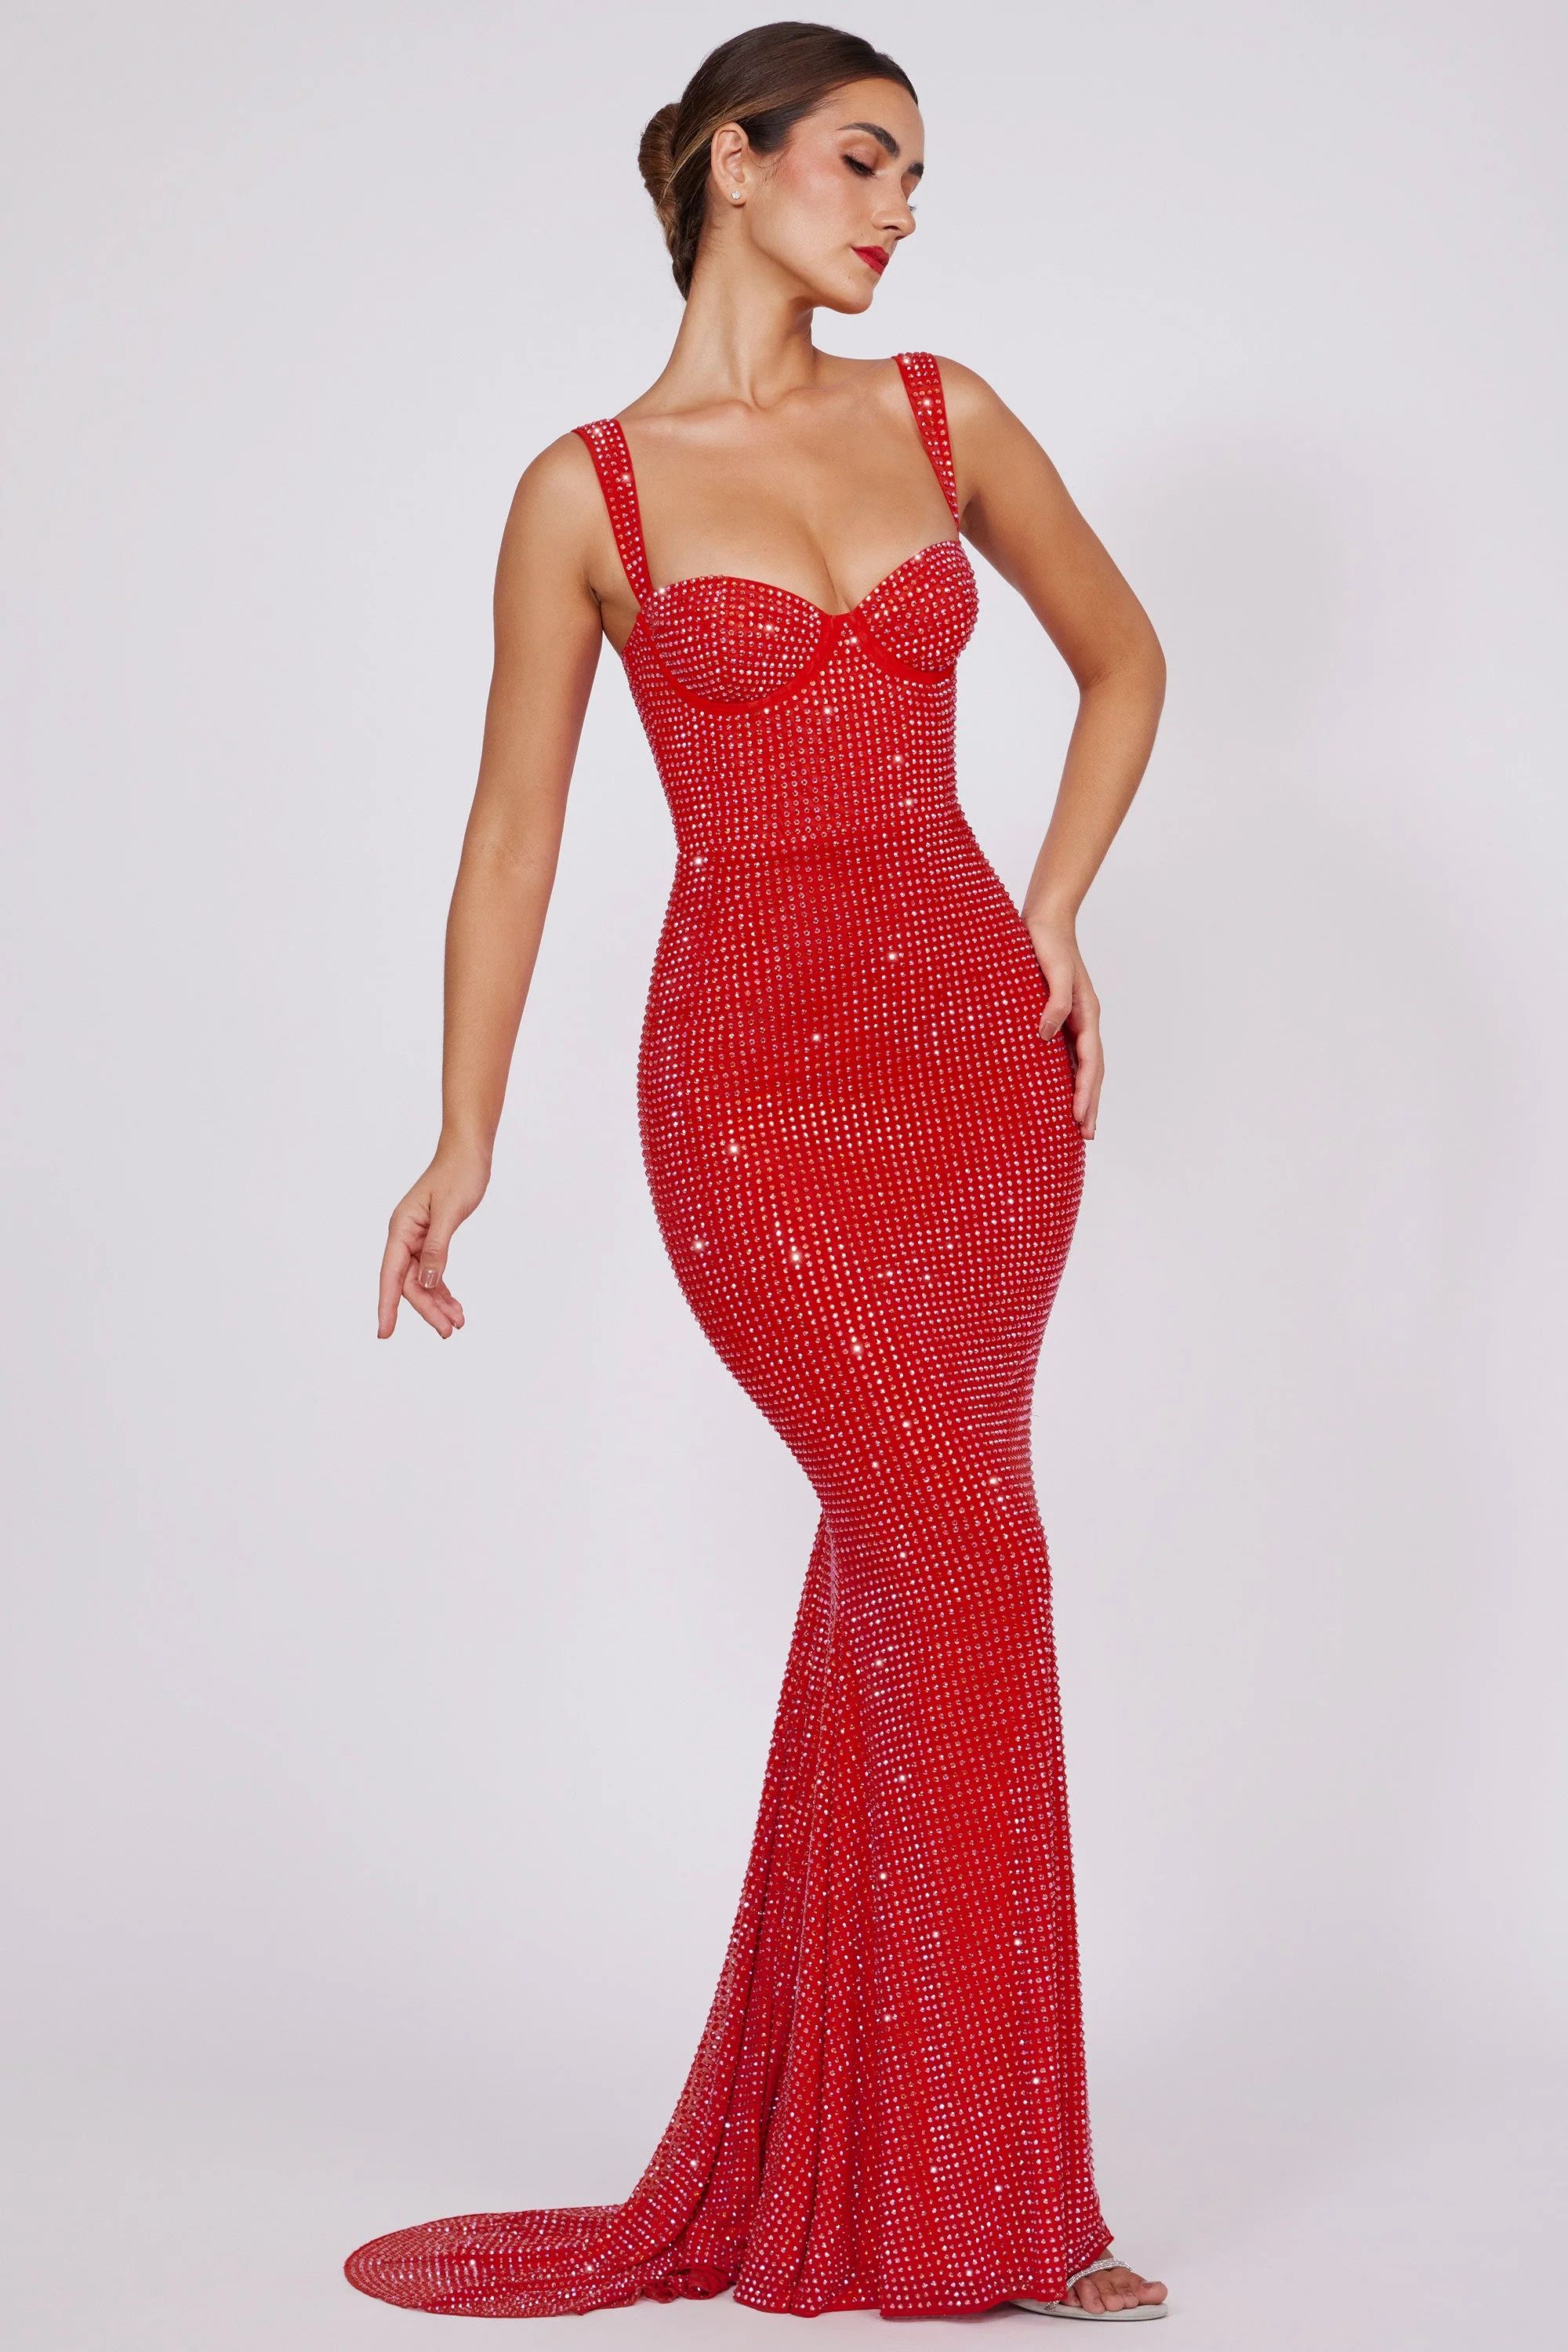 Embellished Corset Fishtail Evening Gown in Fire Red | Oh Polly